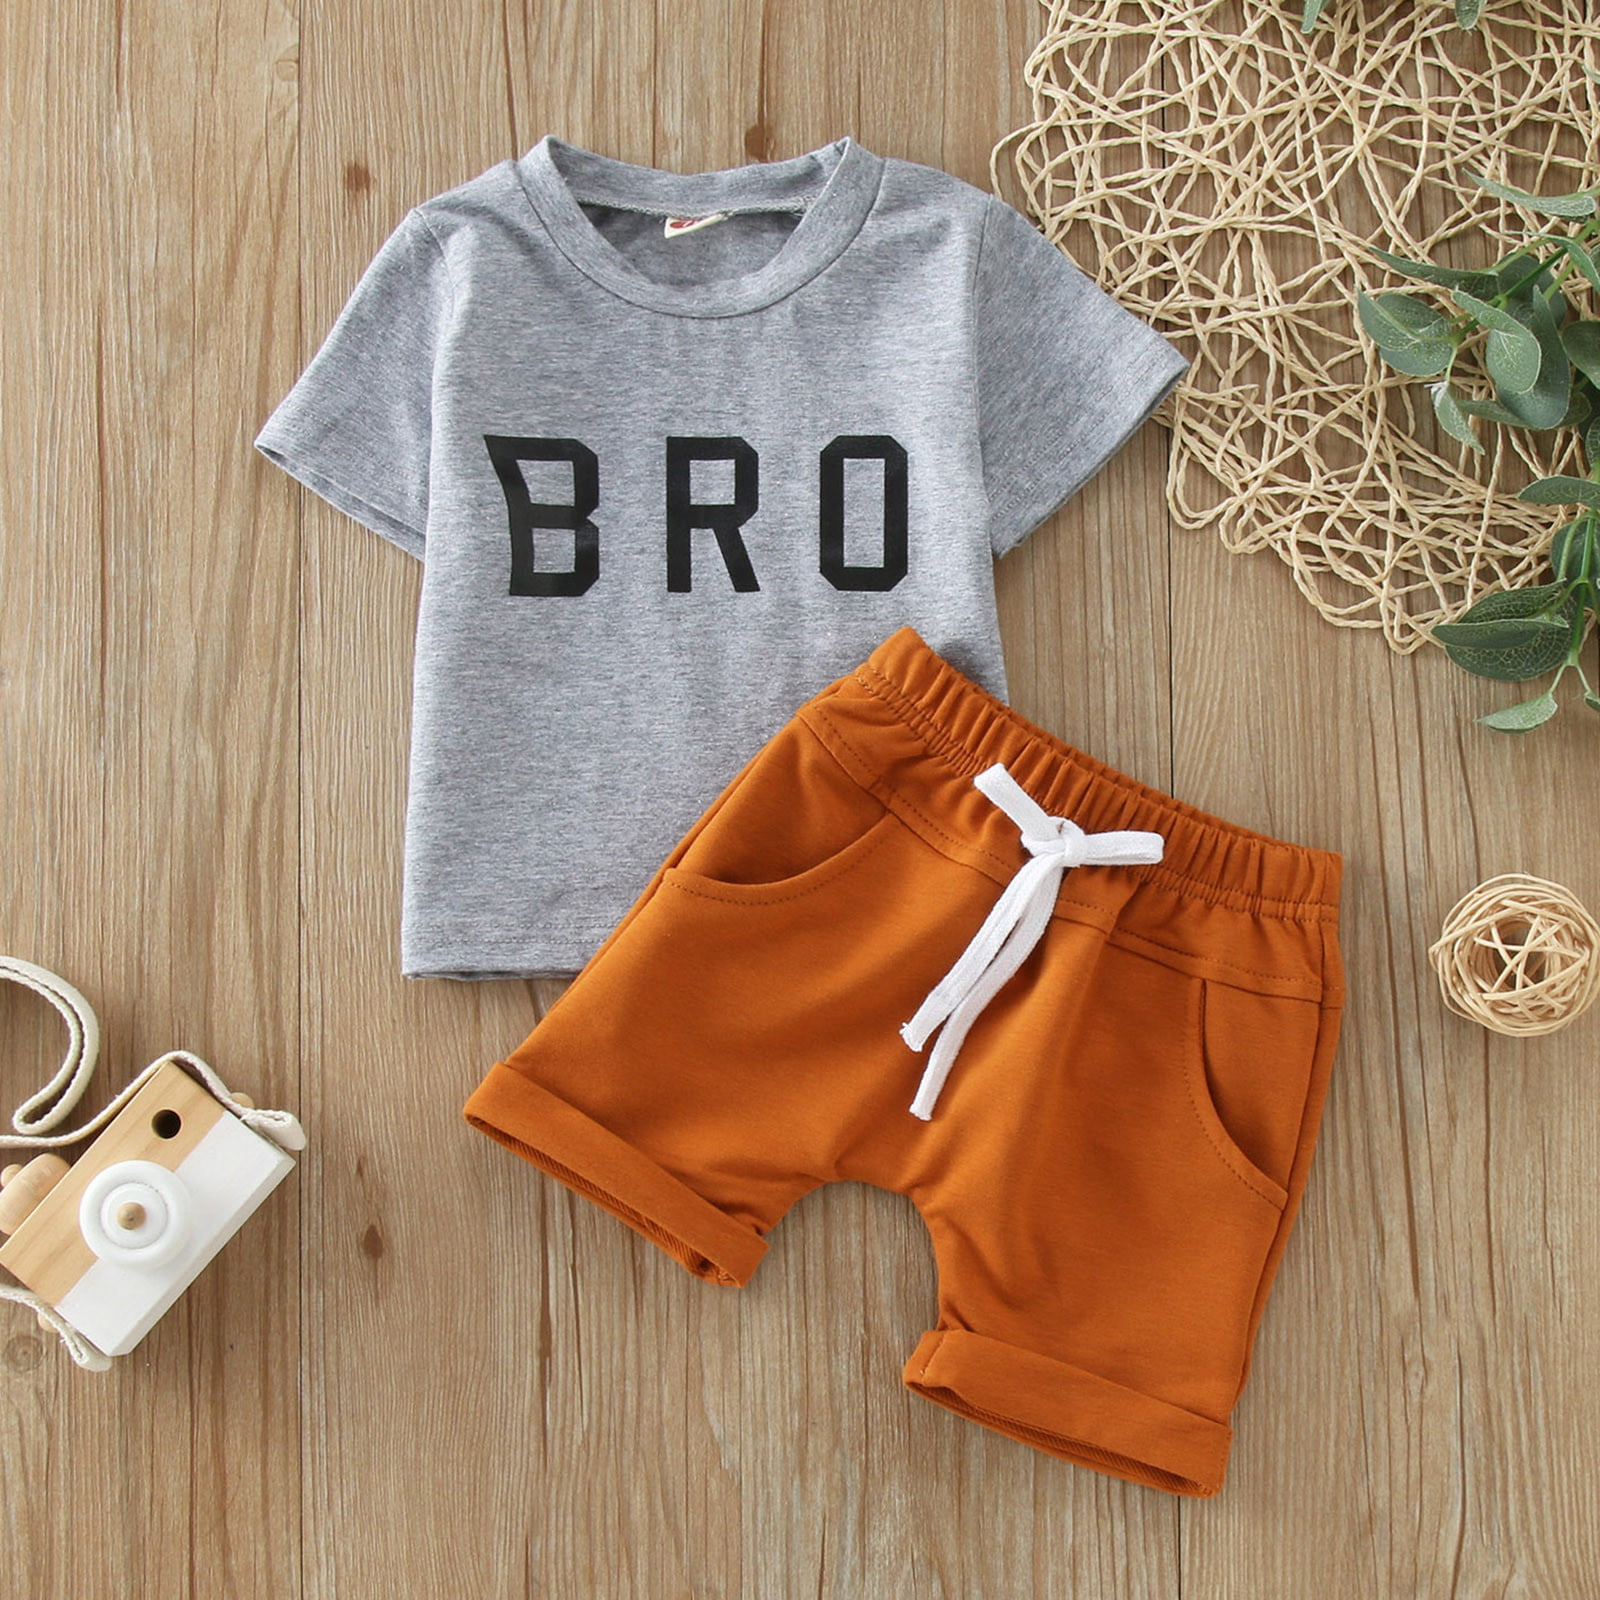 Newborn Infant Boys Clothes Summer Short Sleeve Letter T-Shirt Tops Elastic Solid Shorts 0-24 Months Casual Outfits Set 